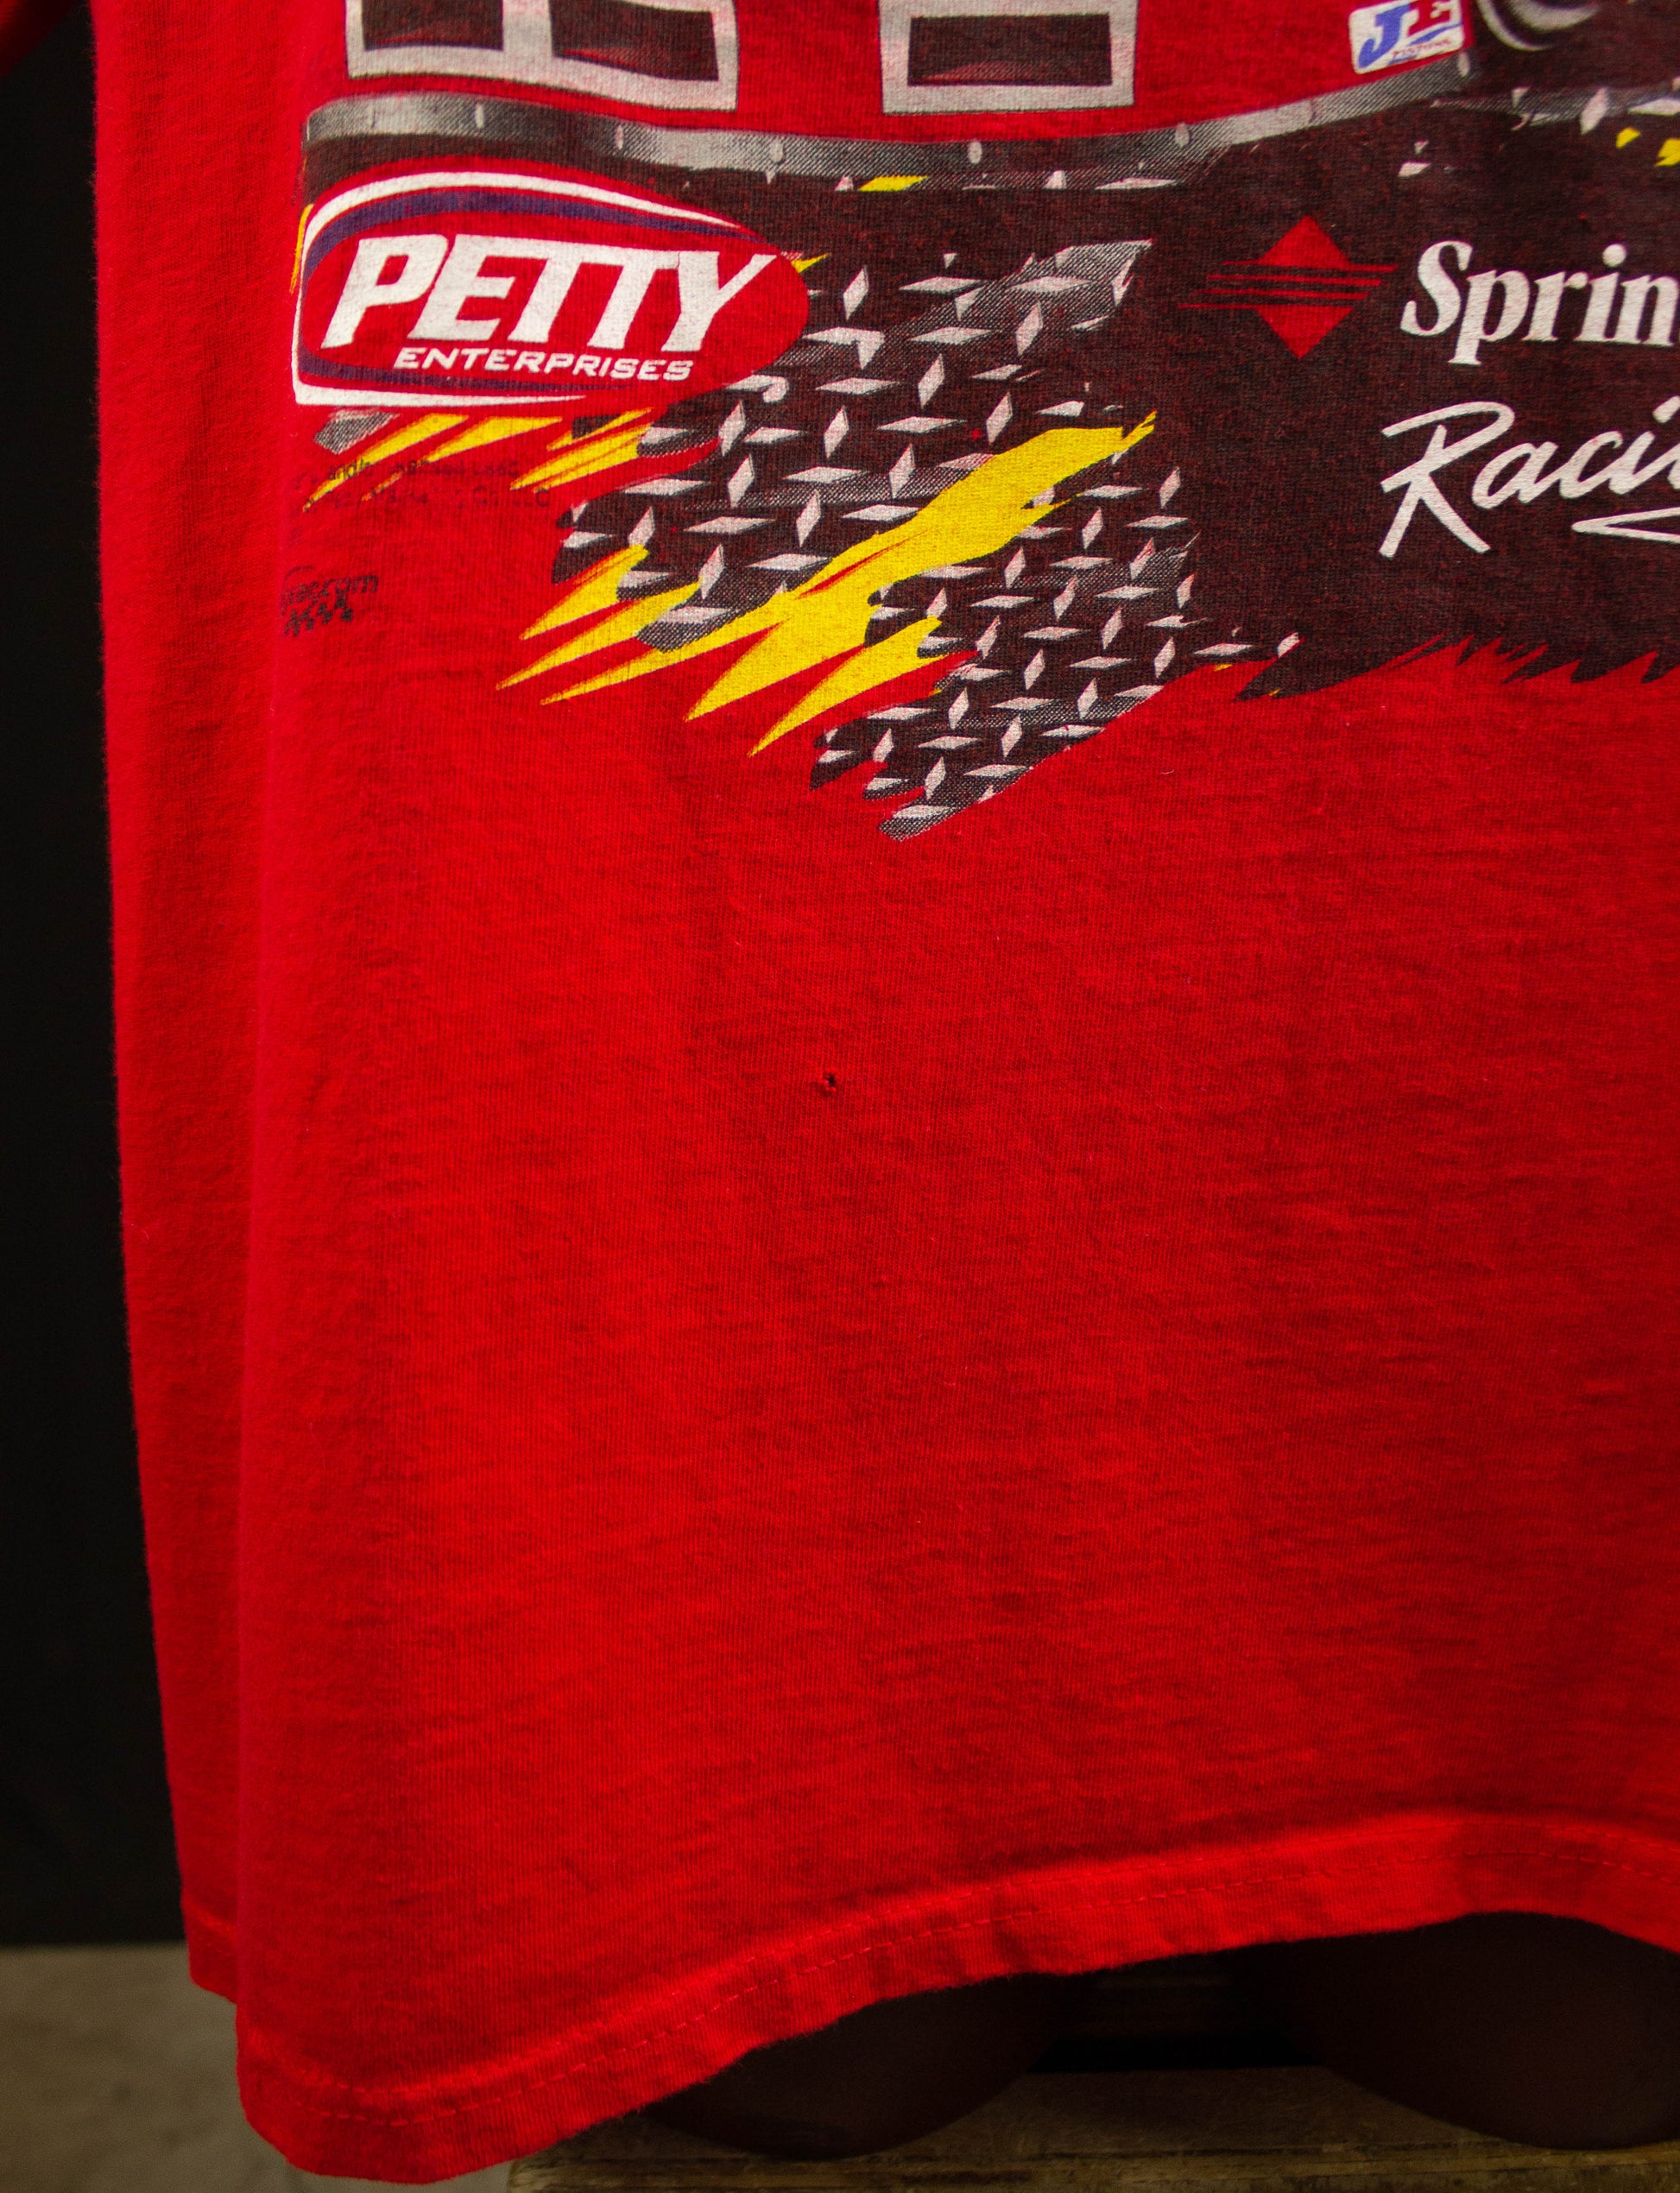 Vintage Kyle Petty Sprint Racing NASCAR Graphic T Shirt 1999 Red and Yellow XL